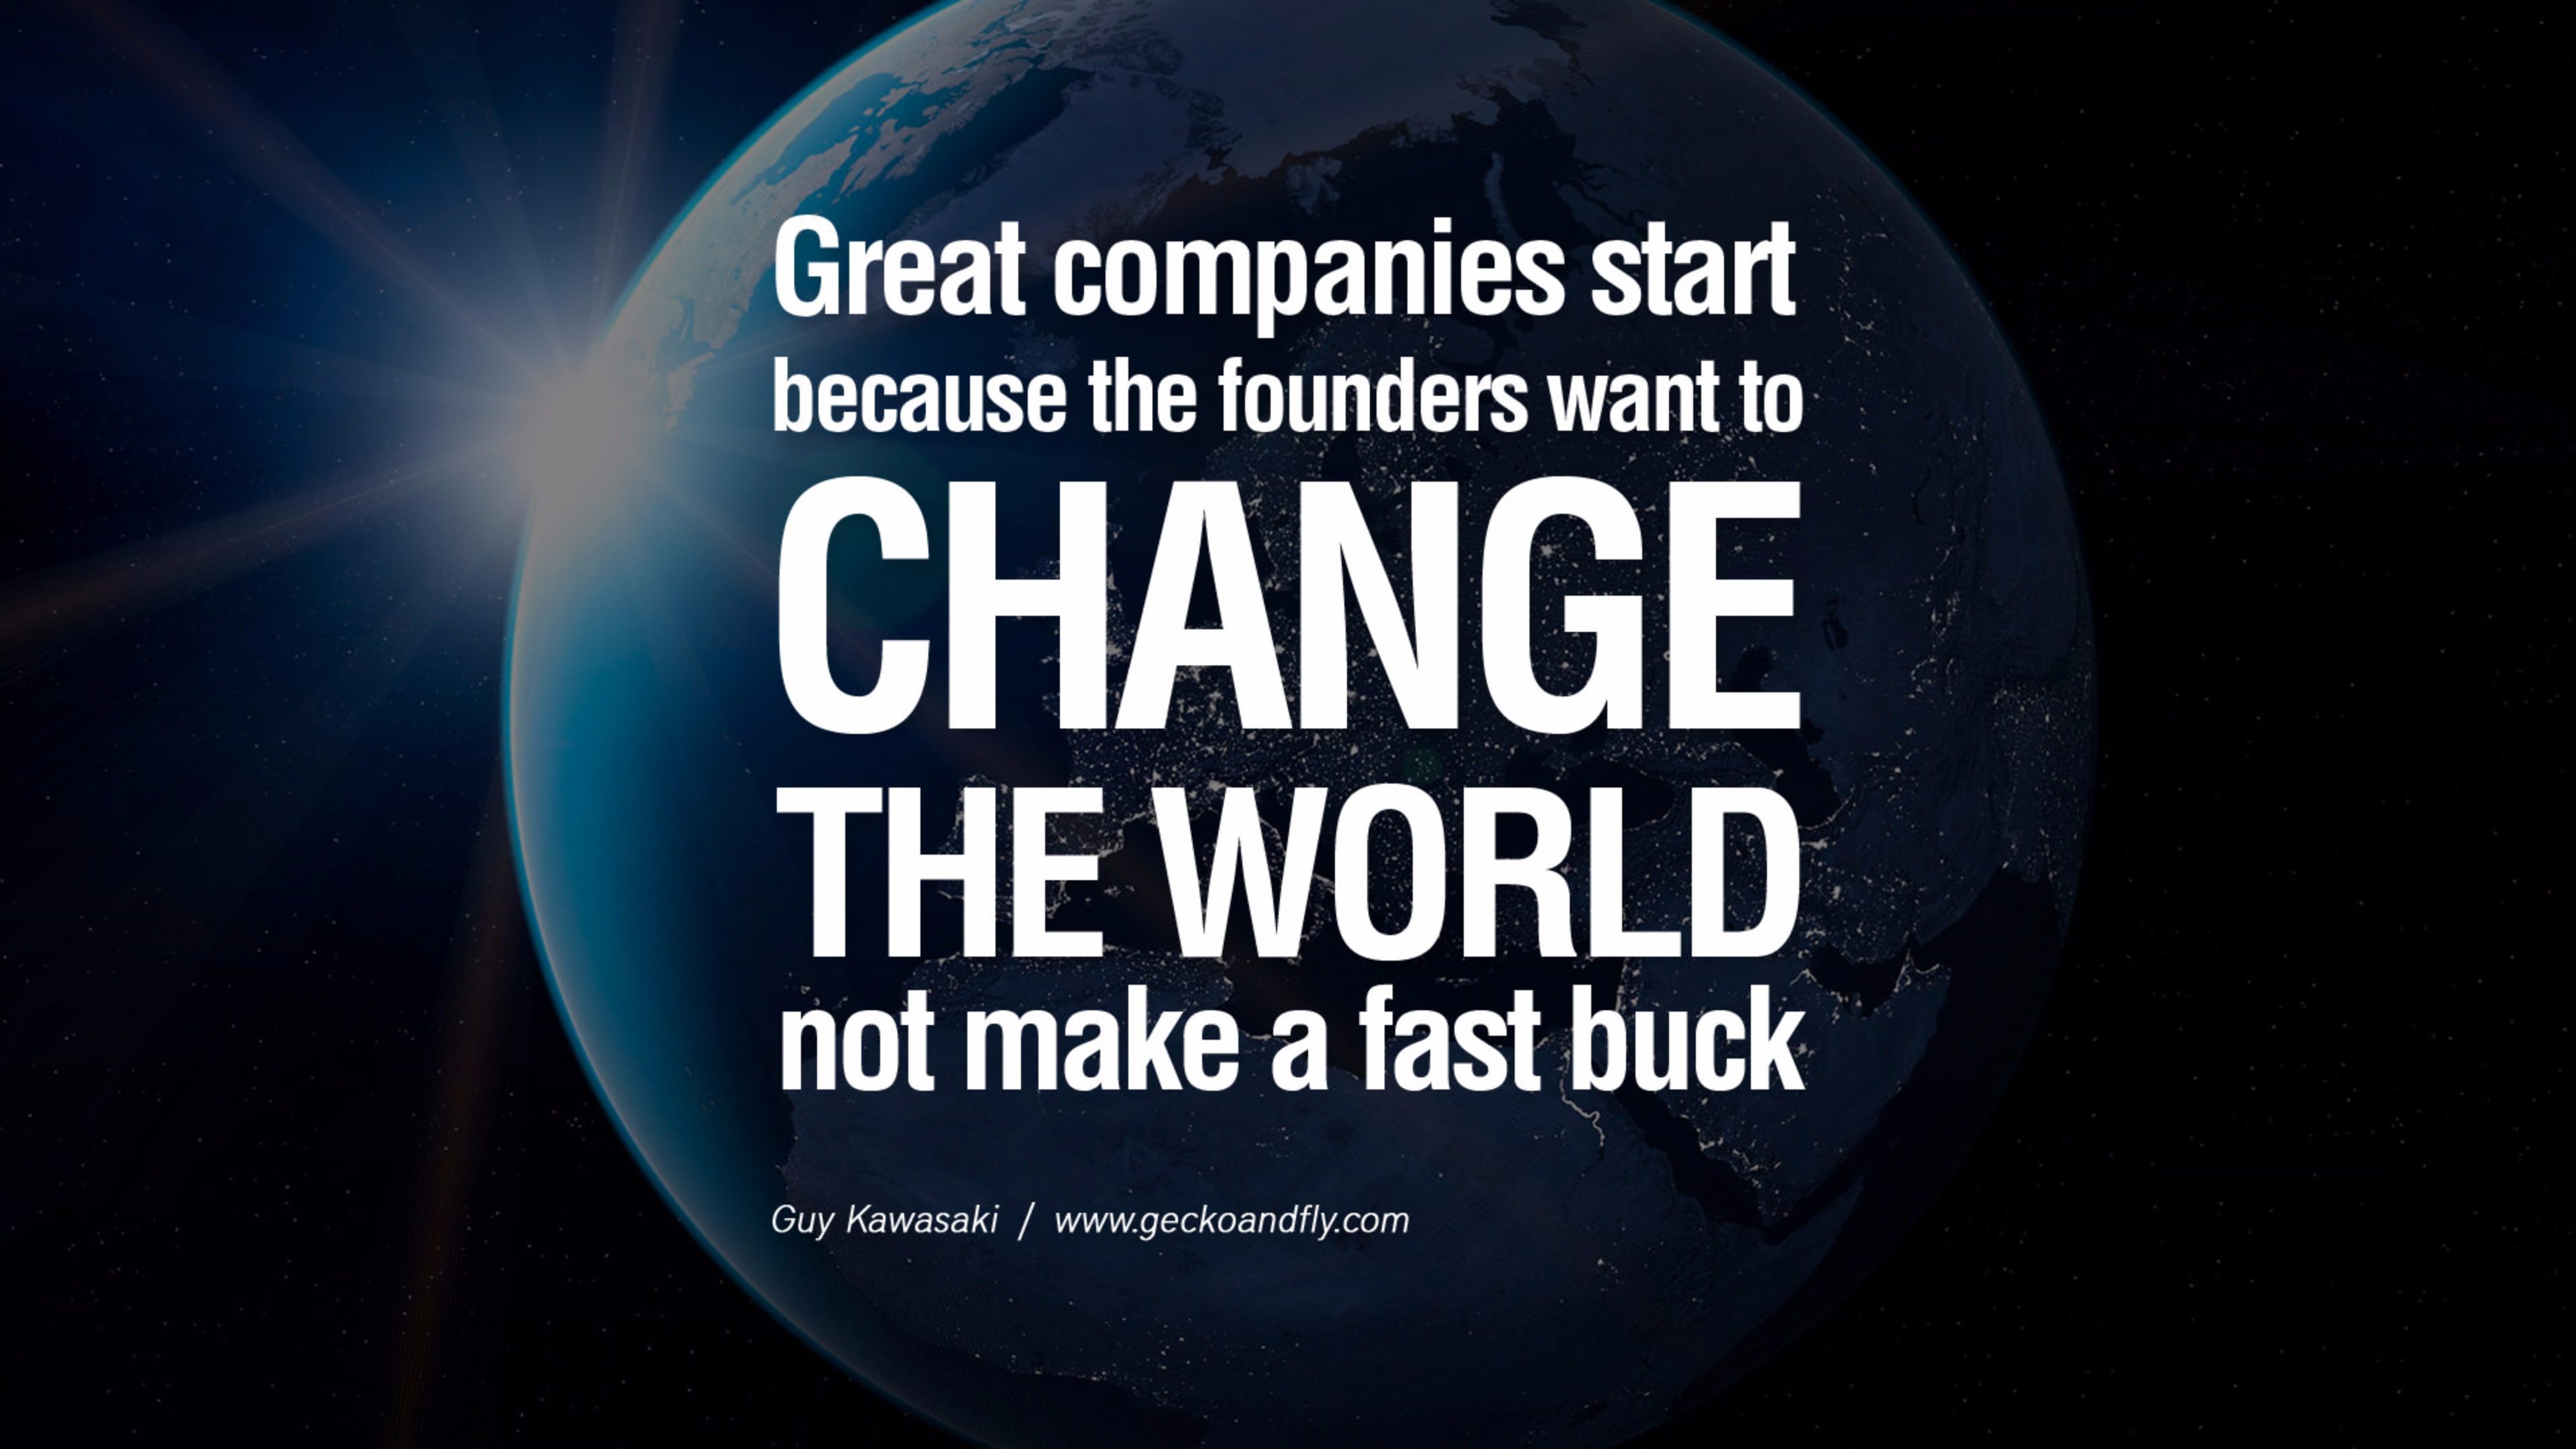 3840x2160 Great companies start because the founder wants to change the world not  make a fast buck - Guy Kawasaki quote